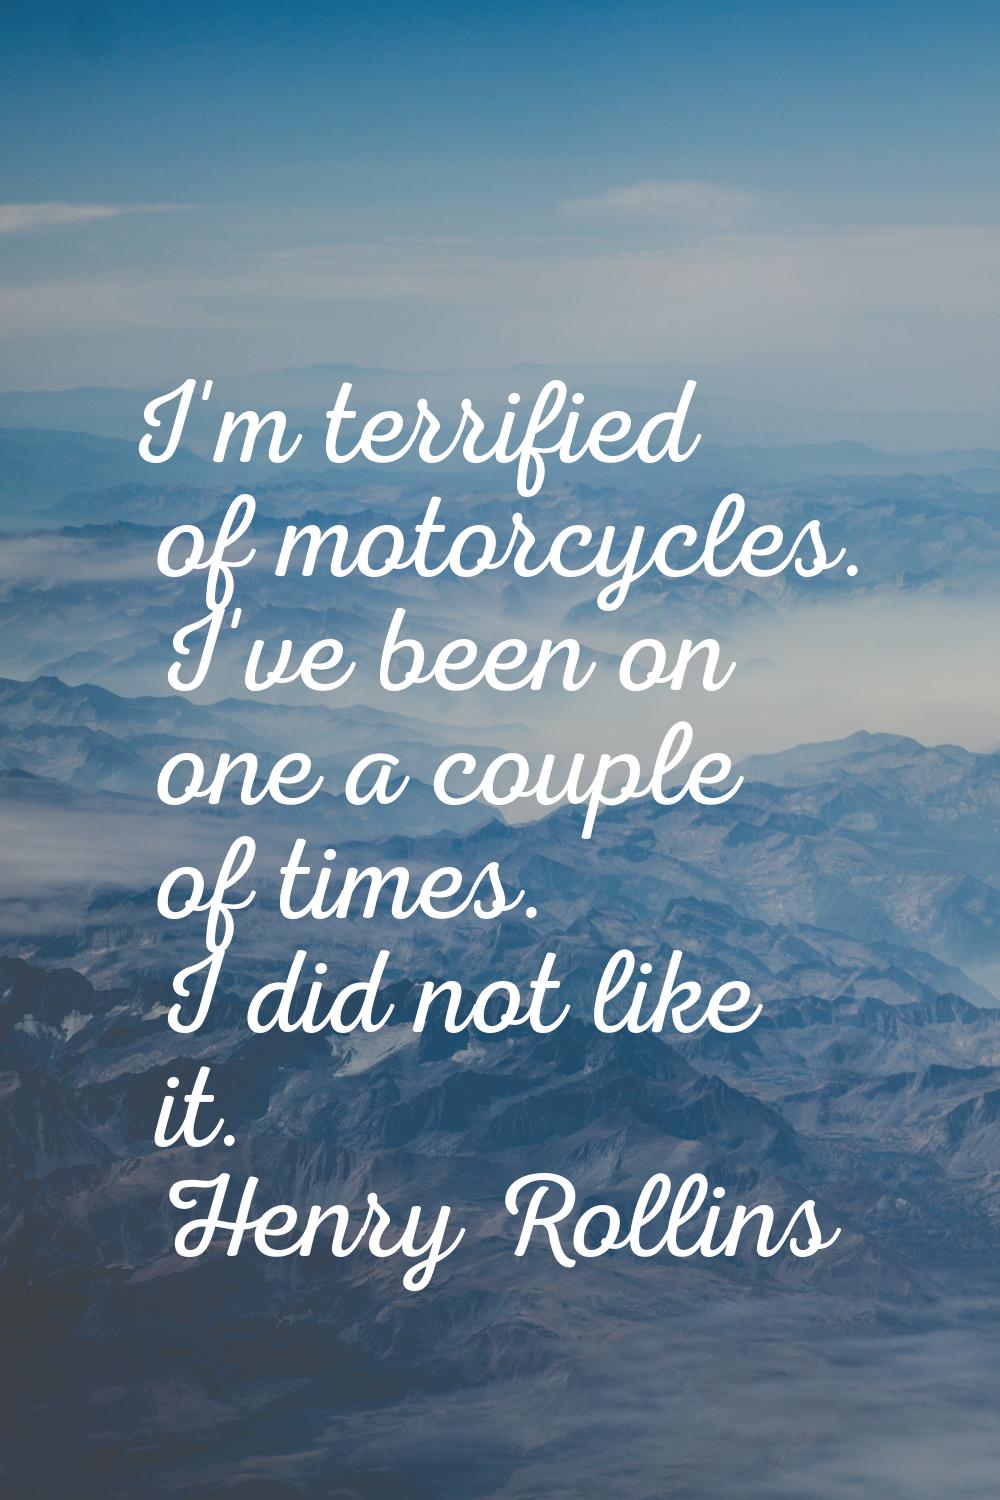 I'm terrified of motorcycles. I've been on one a couple of times. I did not like it.